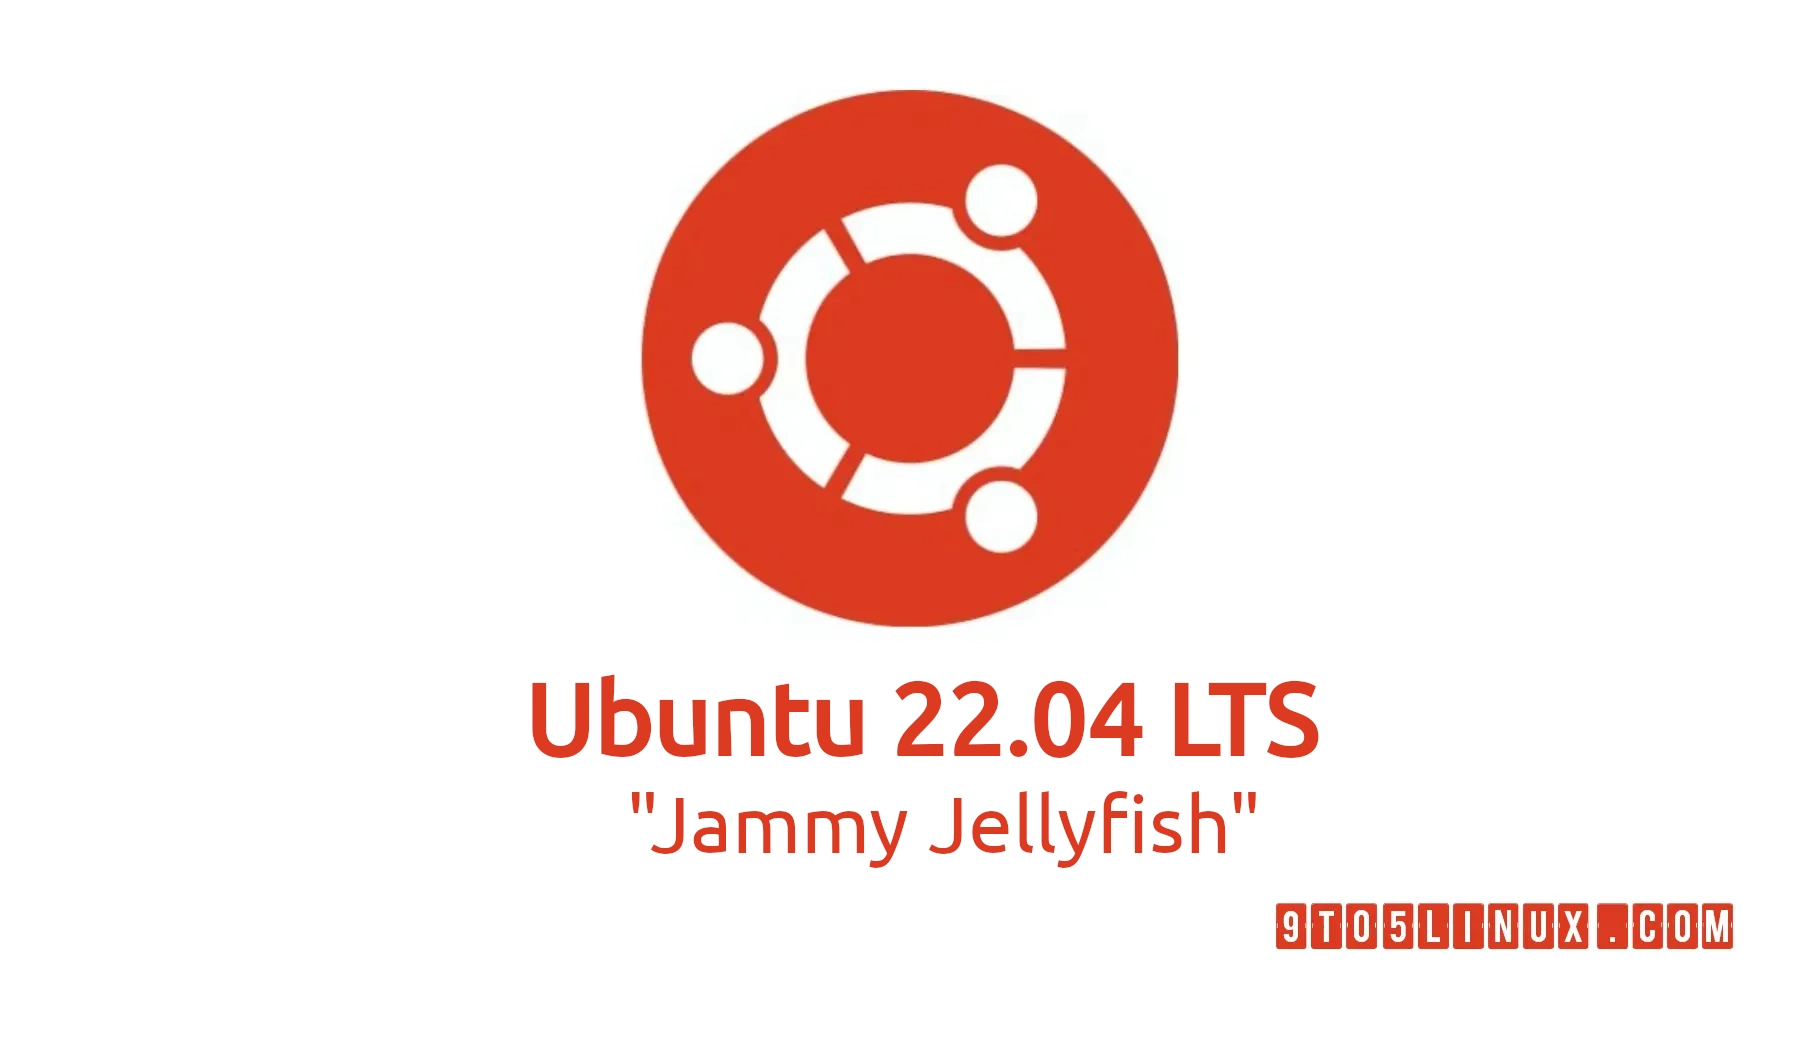 Ubuntu 22.04 LTS (Jammy Jellyfish) Daily Builds Are Now Available for Download